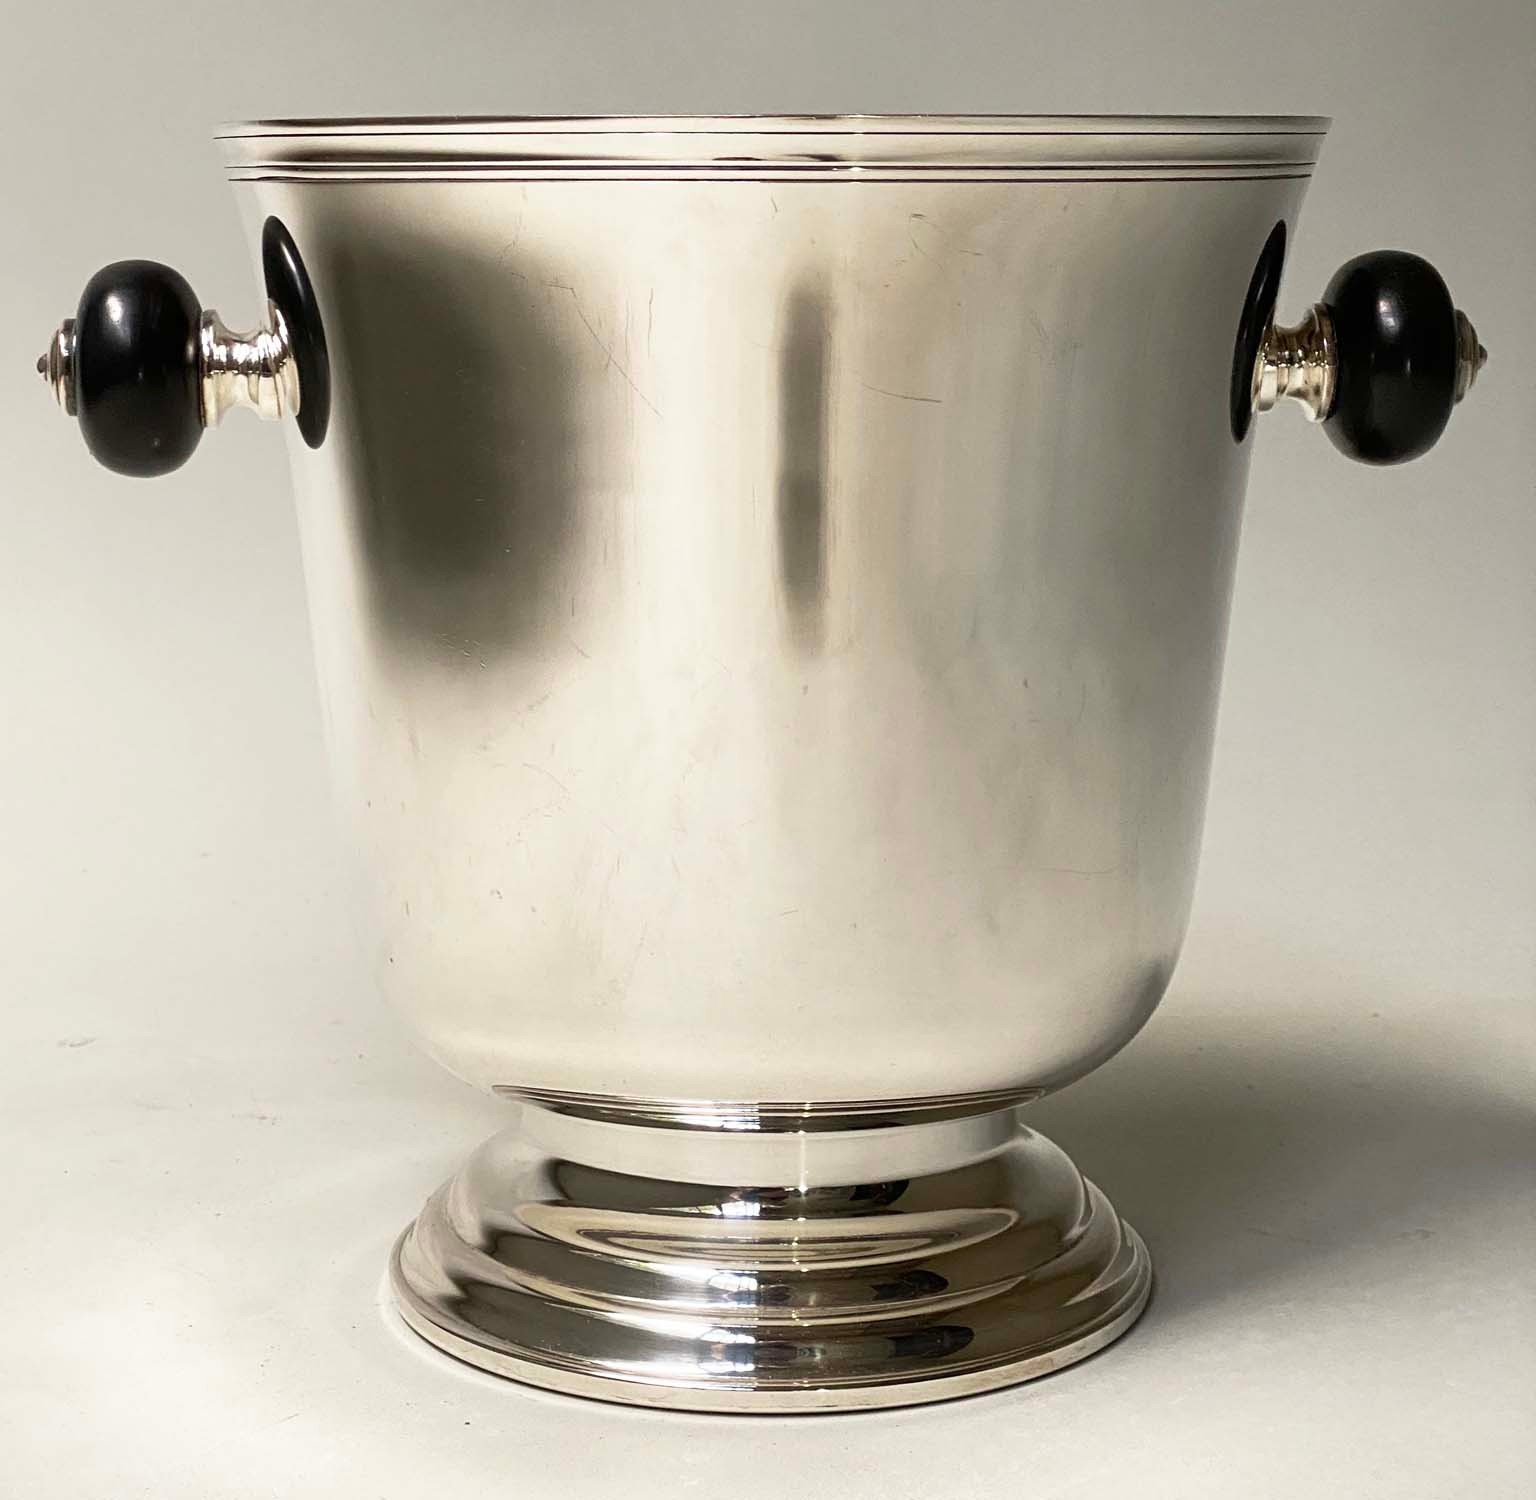 CHRISTOFLE CHAMPAGNE BUCKET, silver plated urn form with turned ebony handles and moulded